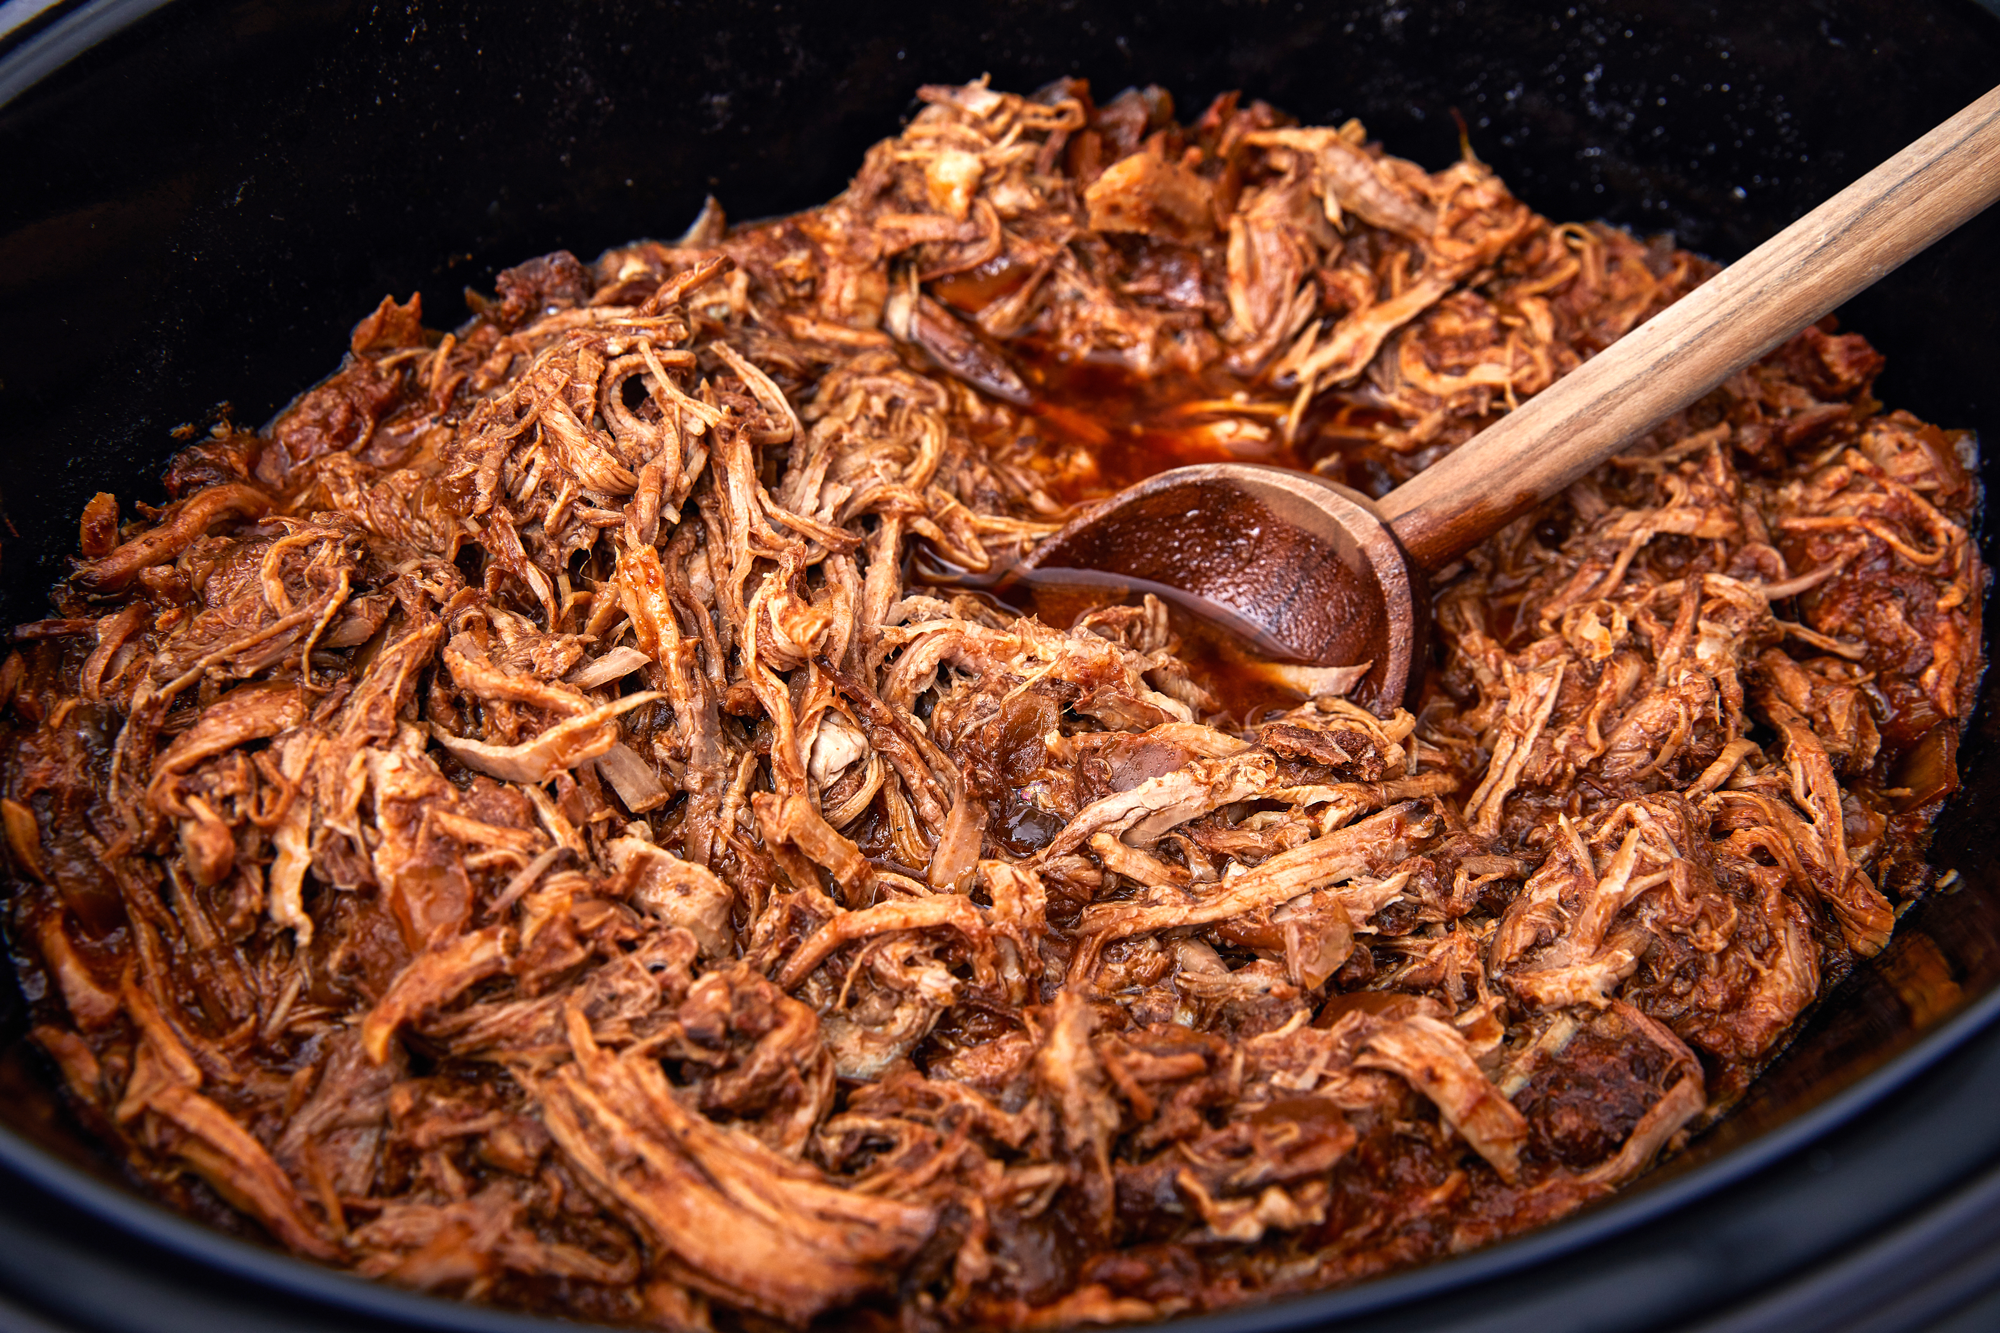 How to cook barbecue pulled pork in a crock pot Easy Slow Cooker Pulled Pork How To Make Pulled Pork In A Crock Pot